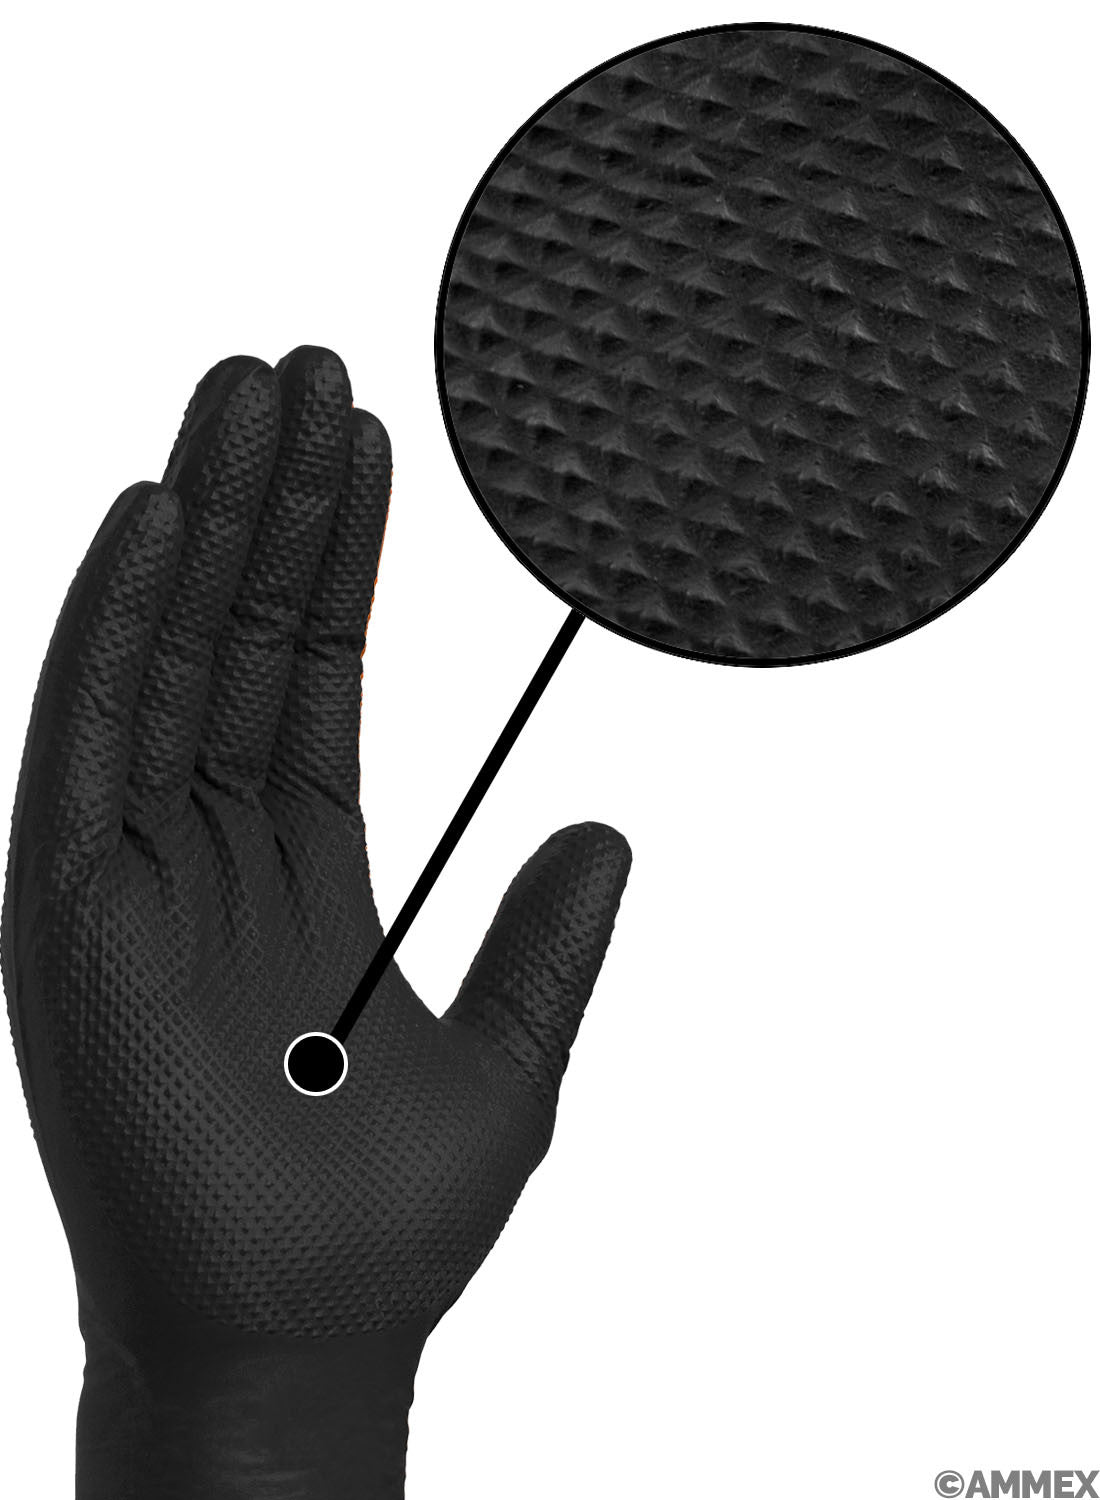 What is a Black Nitrile Glove?